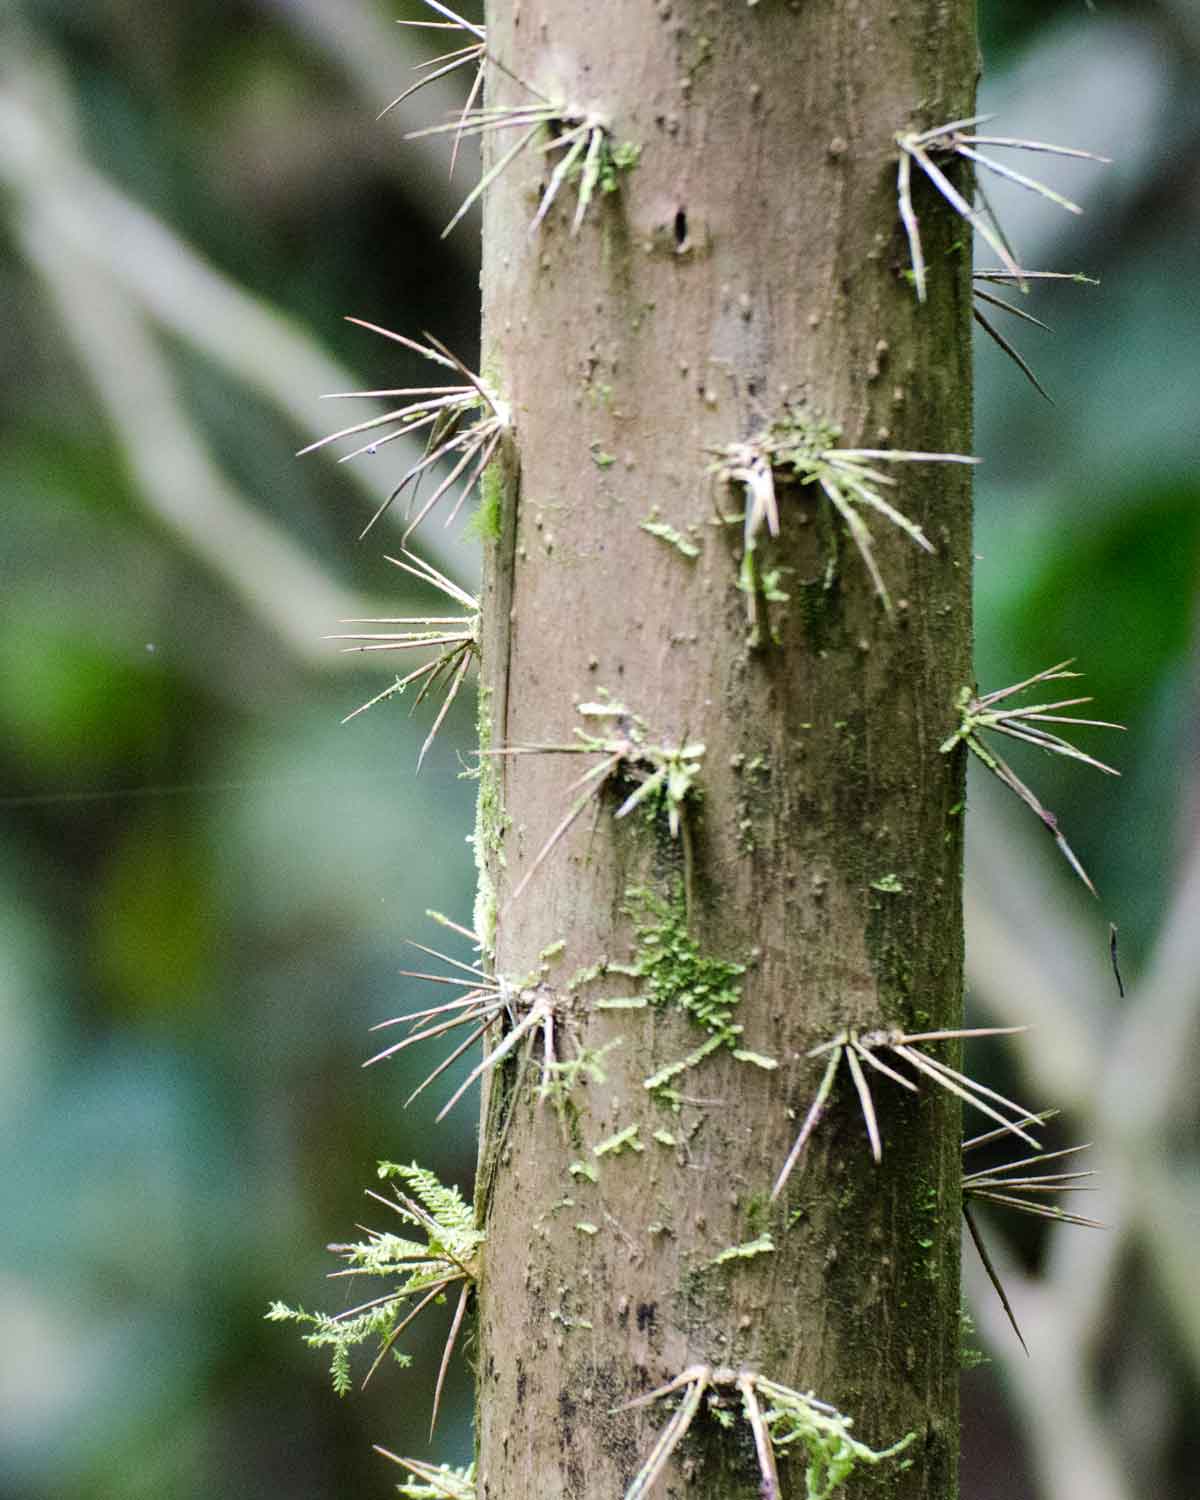 Example of spines on a tree in the cloud forests of the Choco Andino, Ecuador | ©Angela Drake